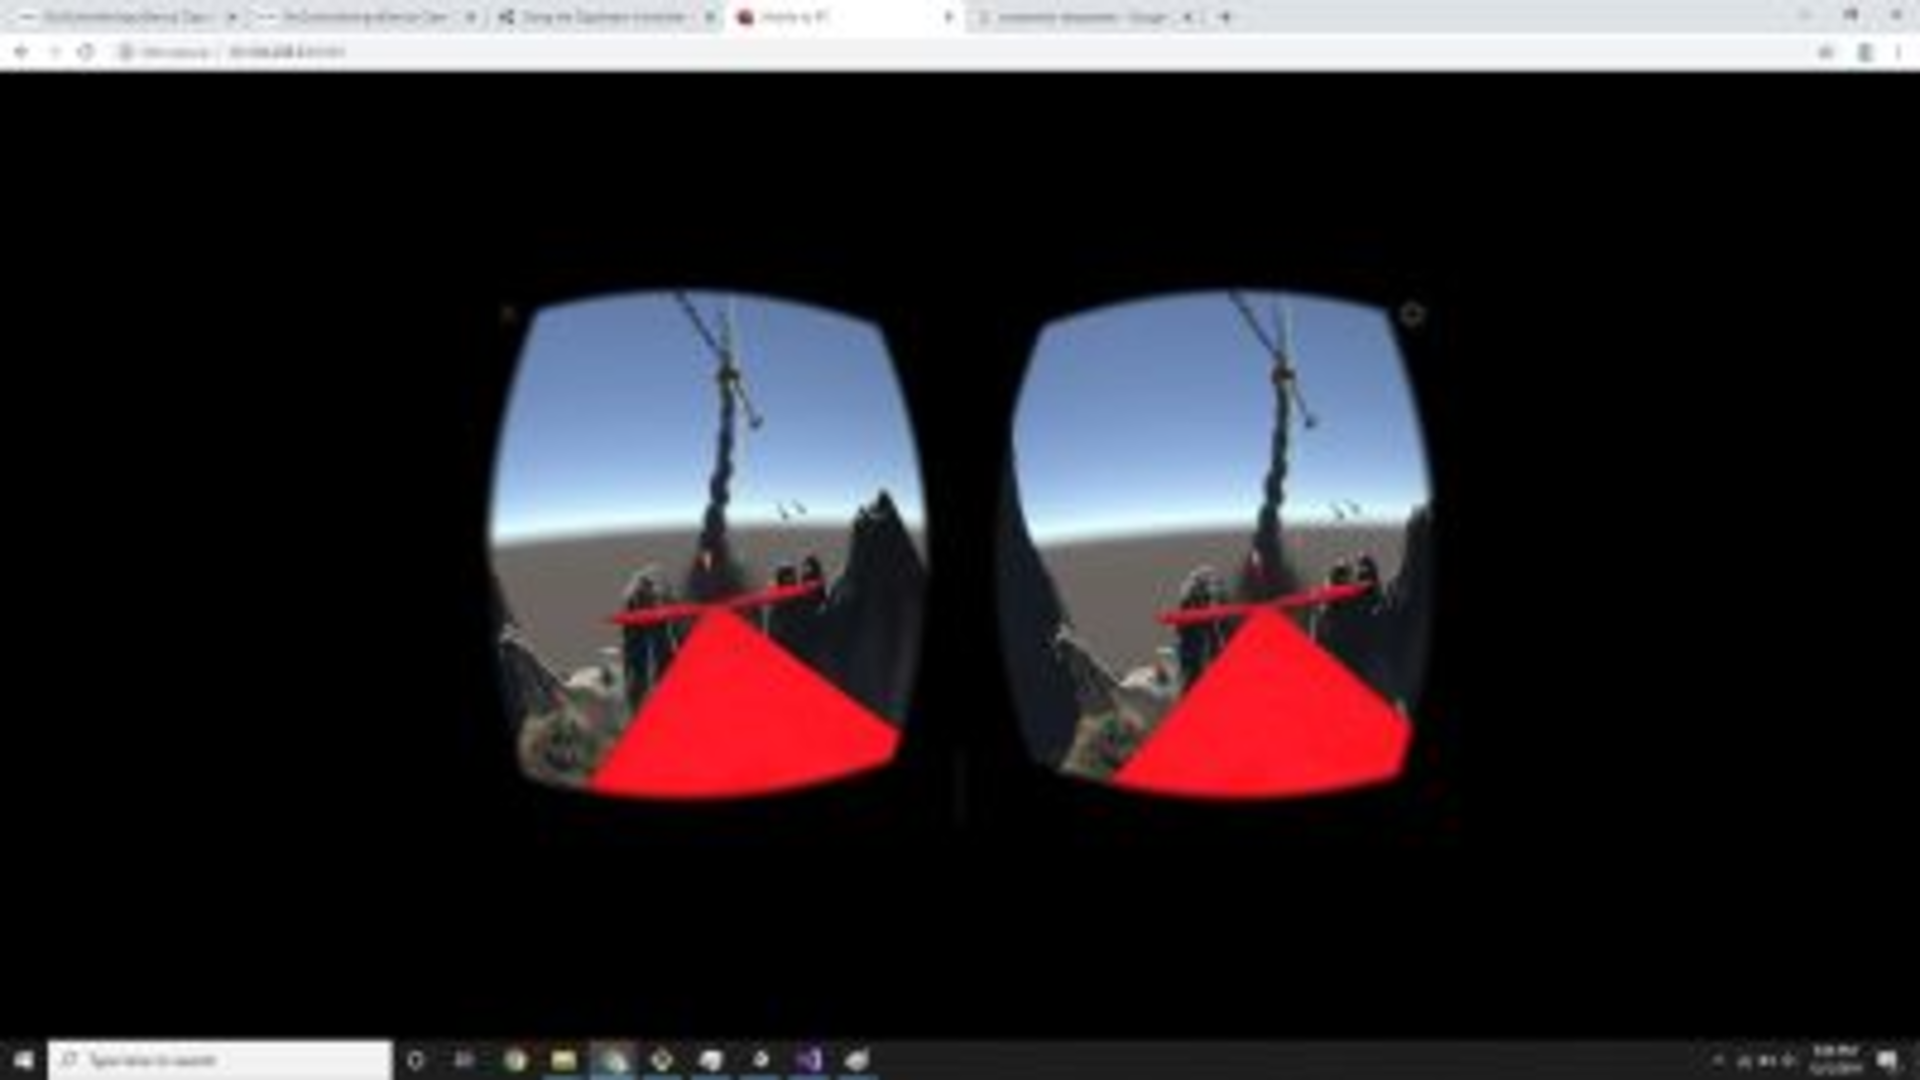 Back View of the Plane in VR